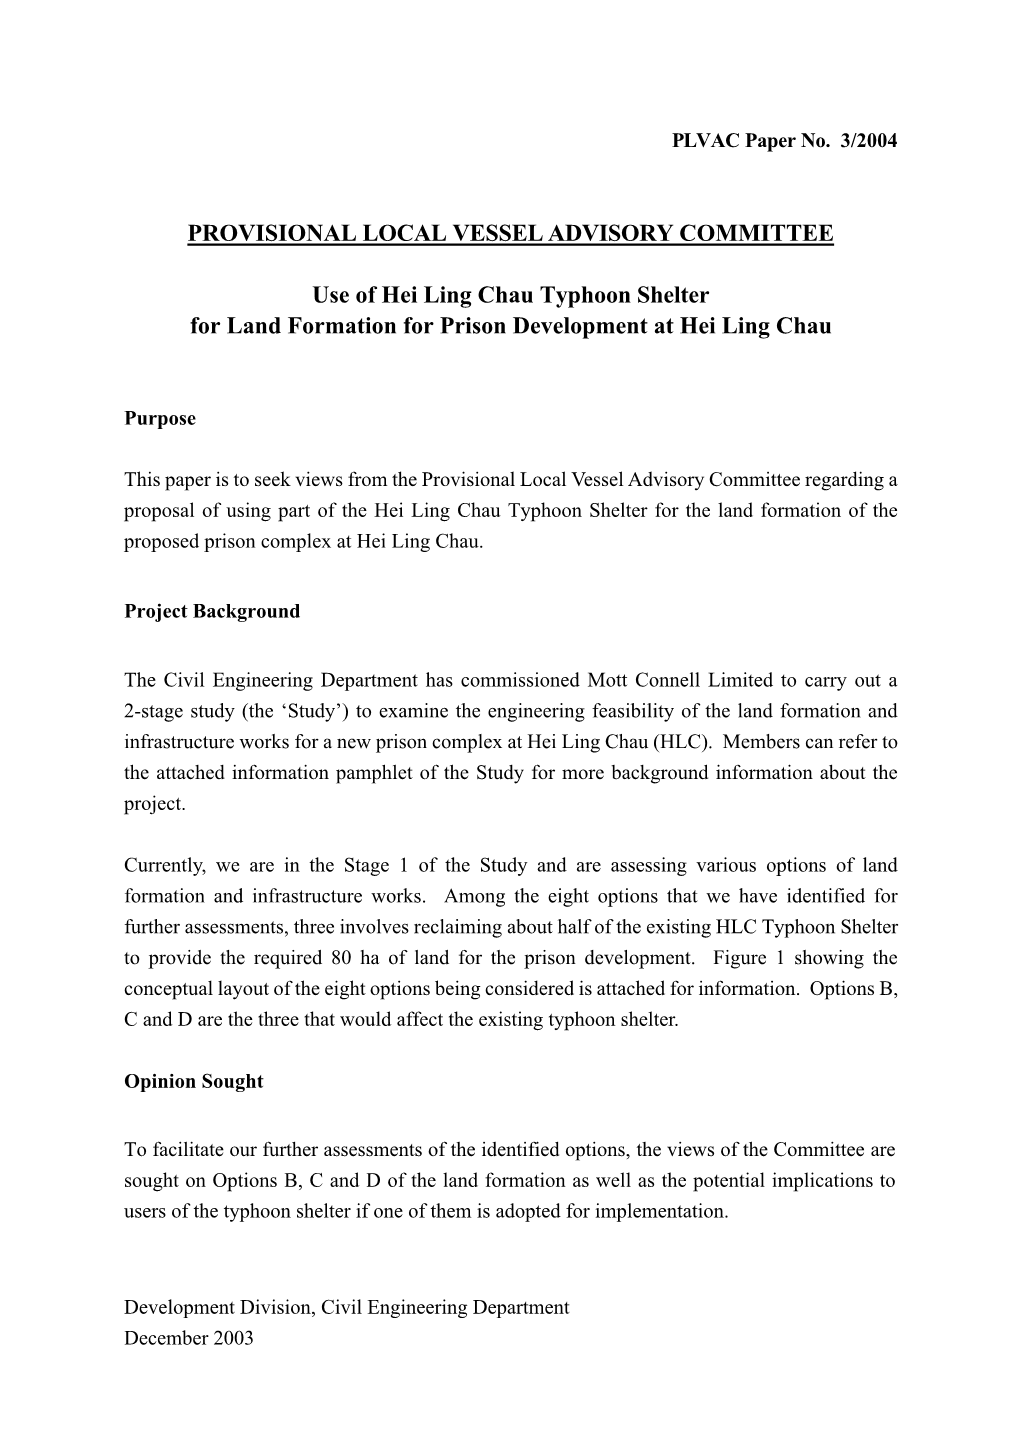 PROVISIONAL LOCAL VESSEL ADVISORY COMMITTEE Use Of